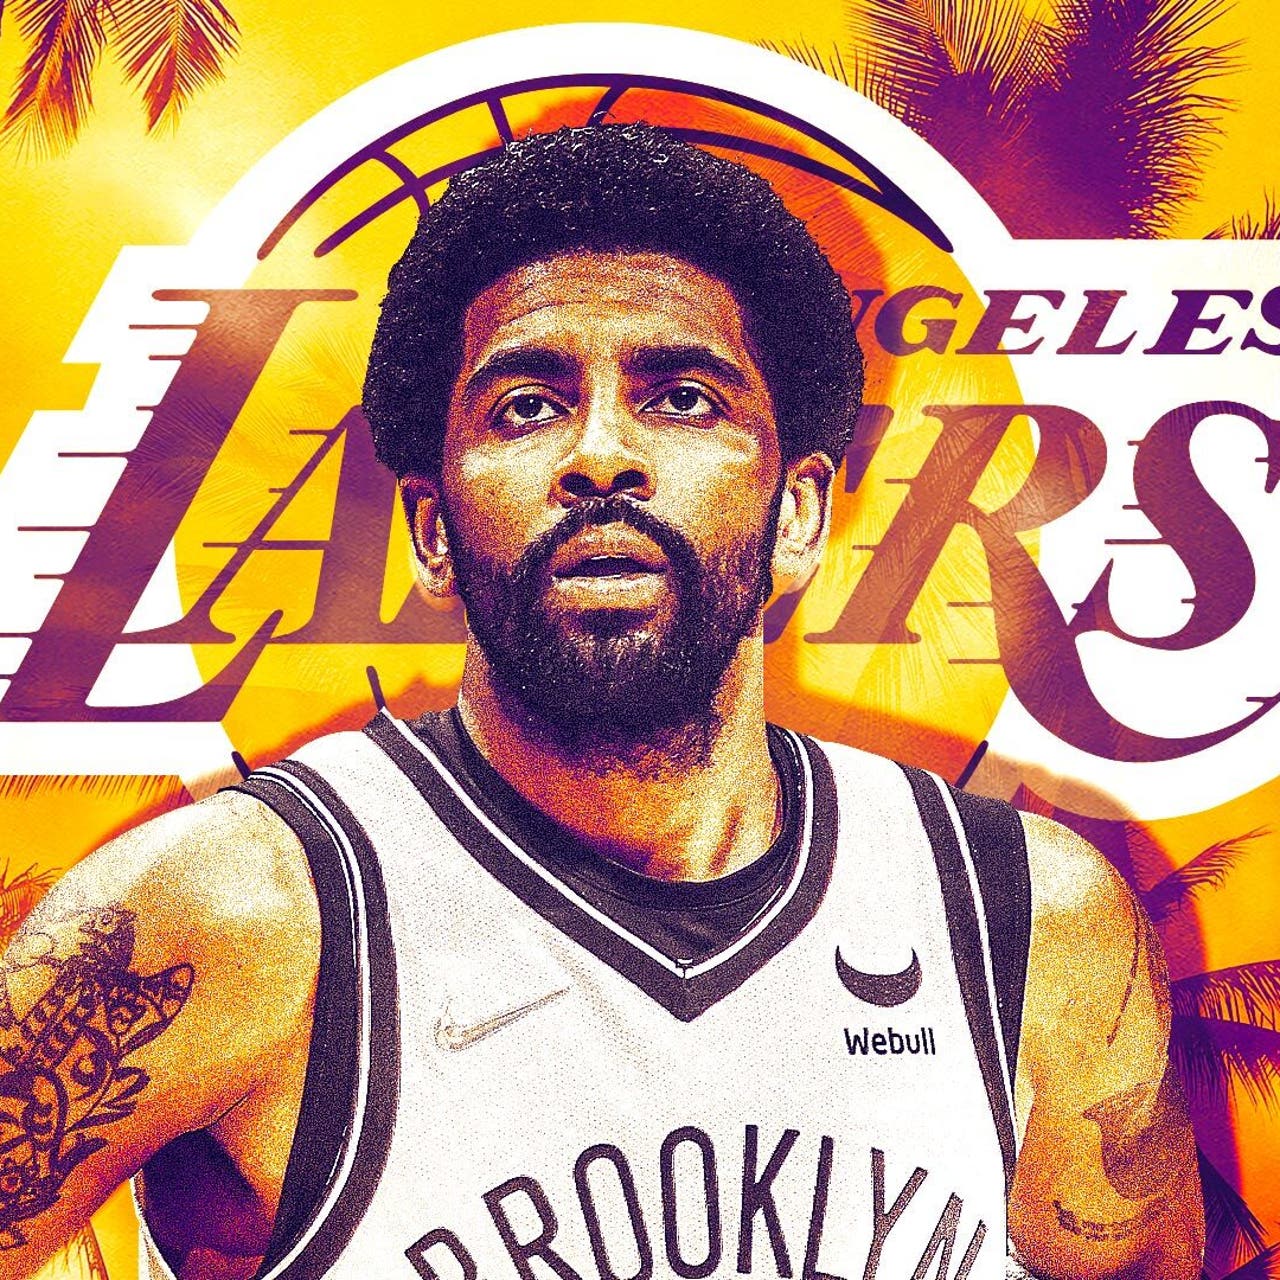 Chris Haynes: Lakers don't seem interested in trading for Kyrie Irving